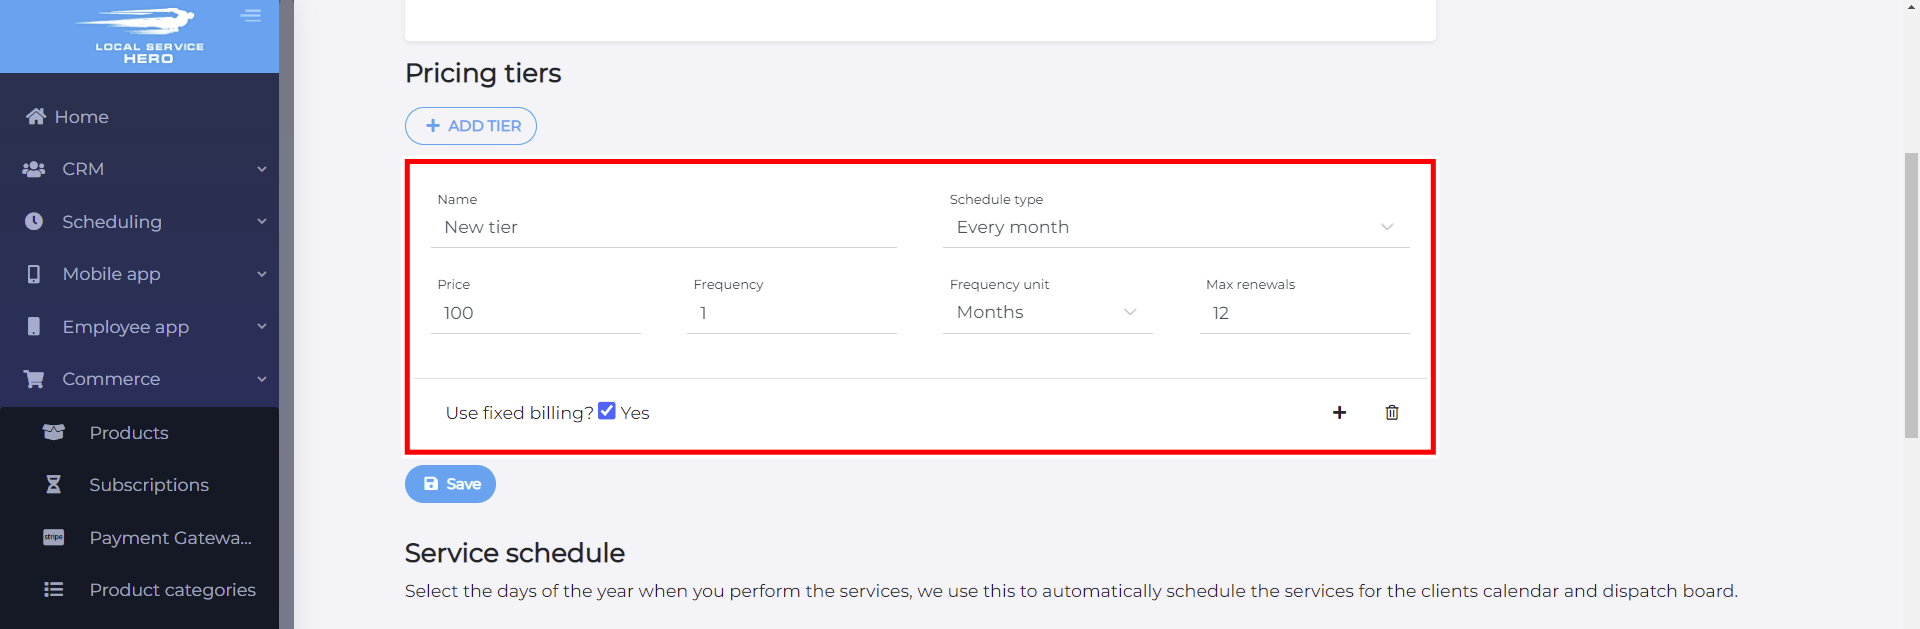 manage subscriptions local service hero